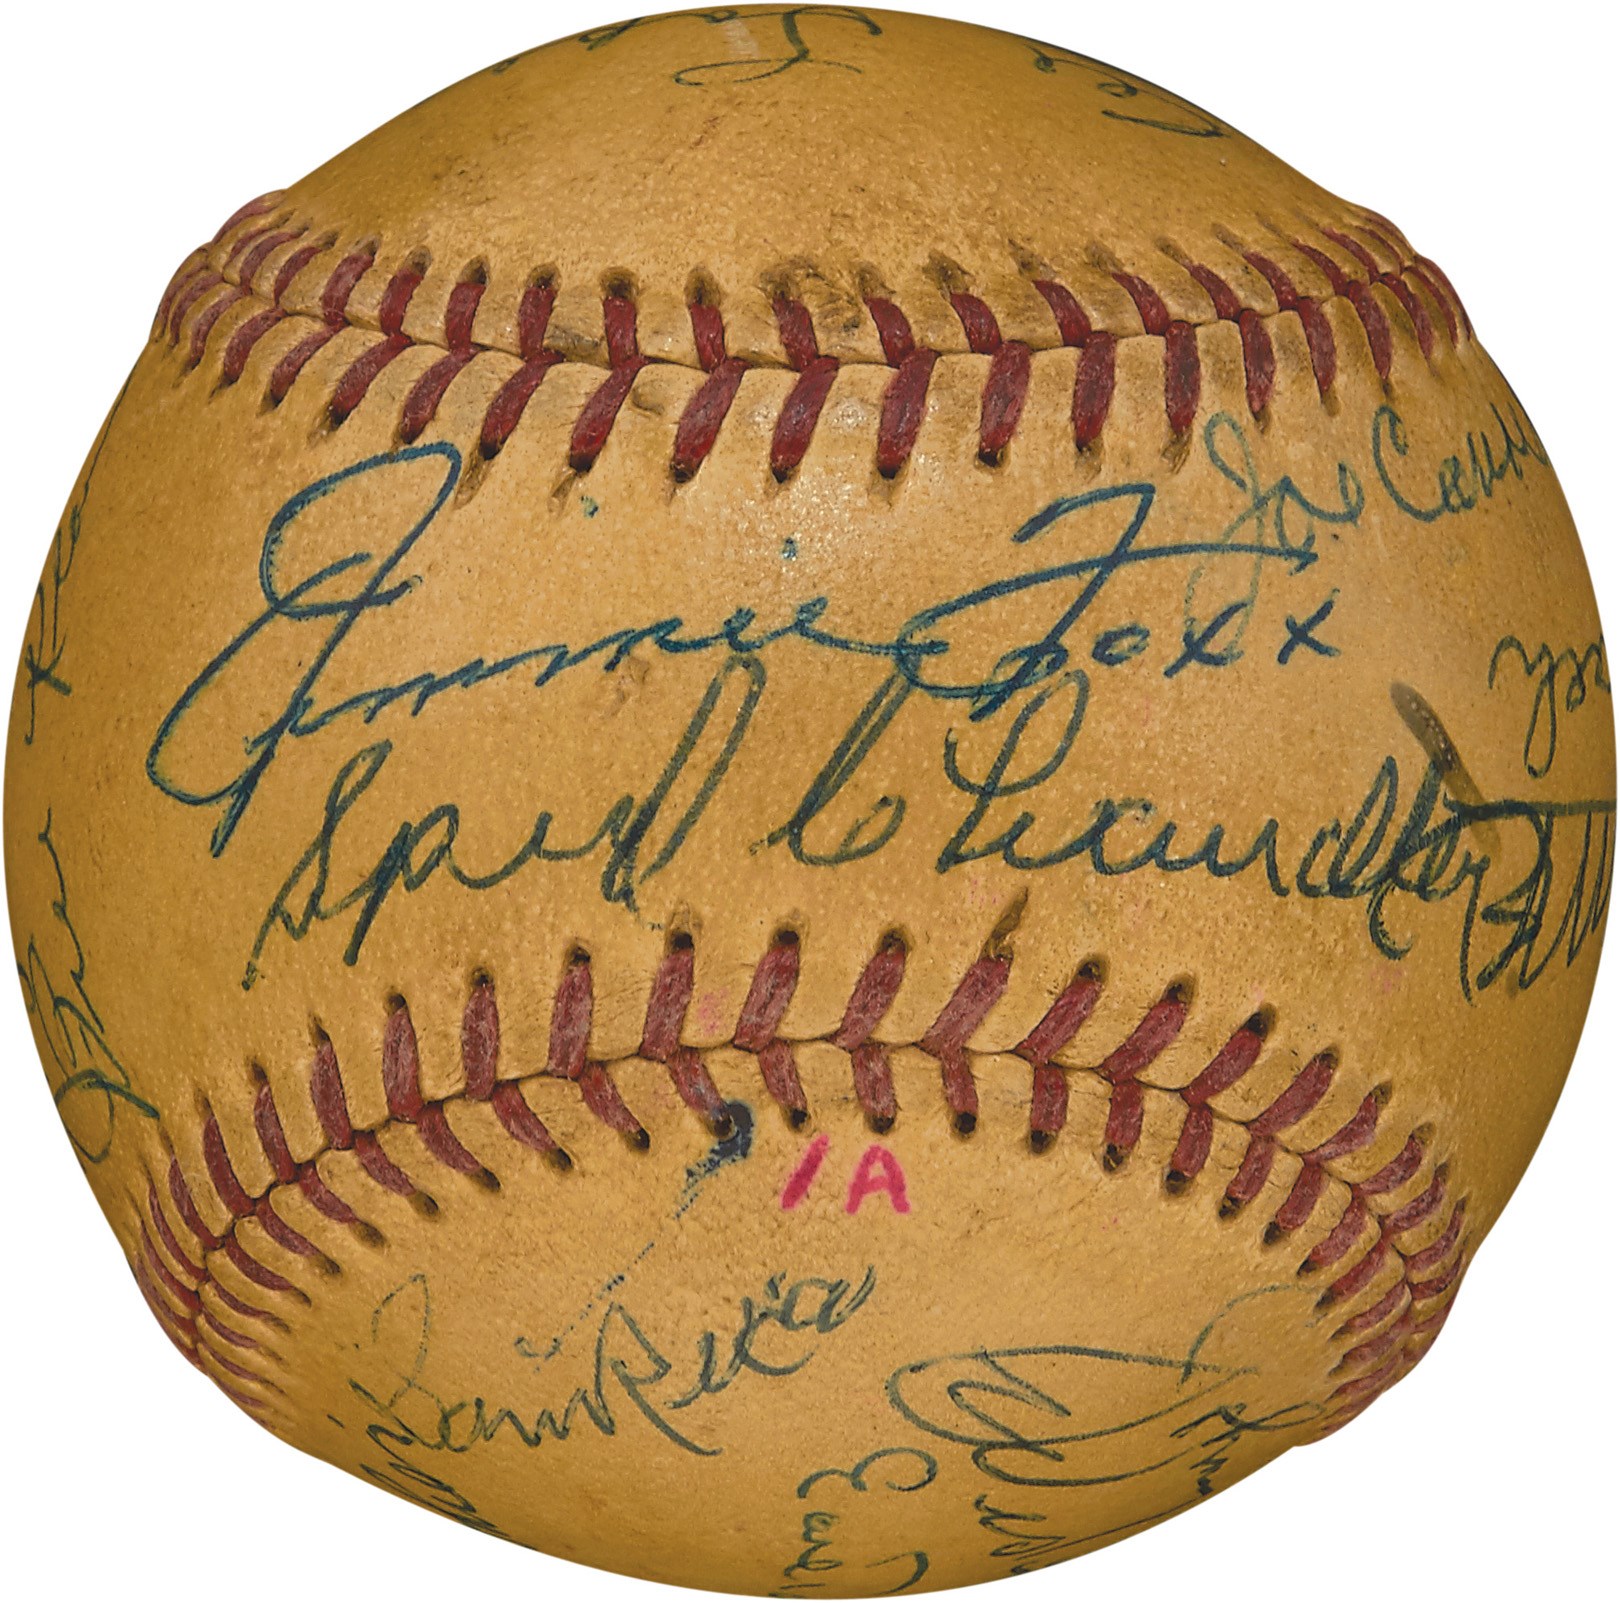 1956 "March of Dimes" Old Timers Day Signed Baseball w/Jimmie Foxx